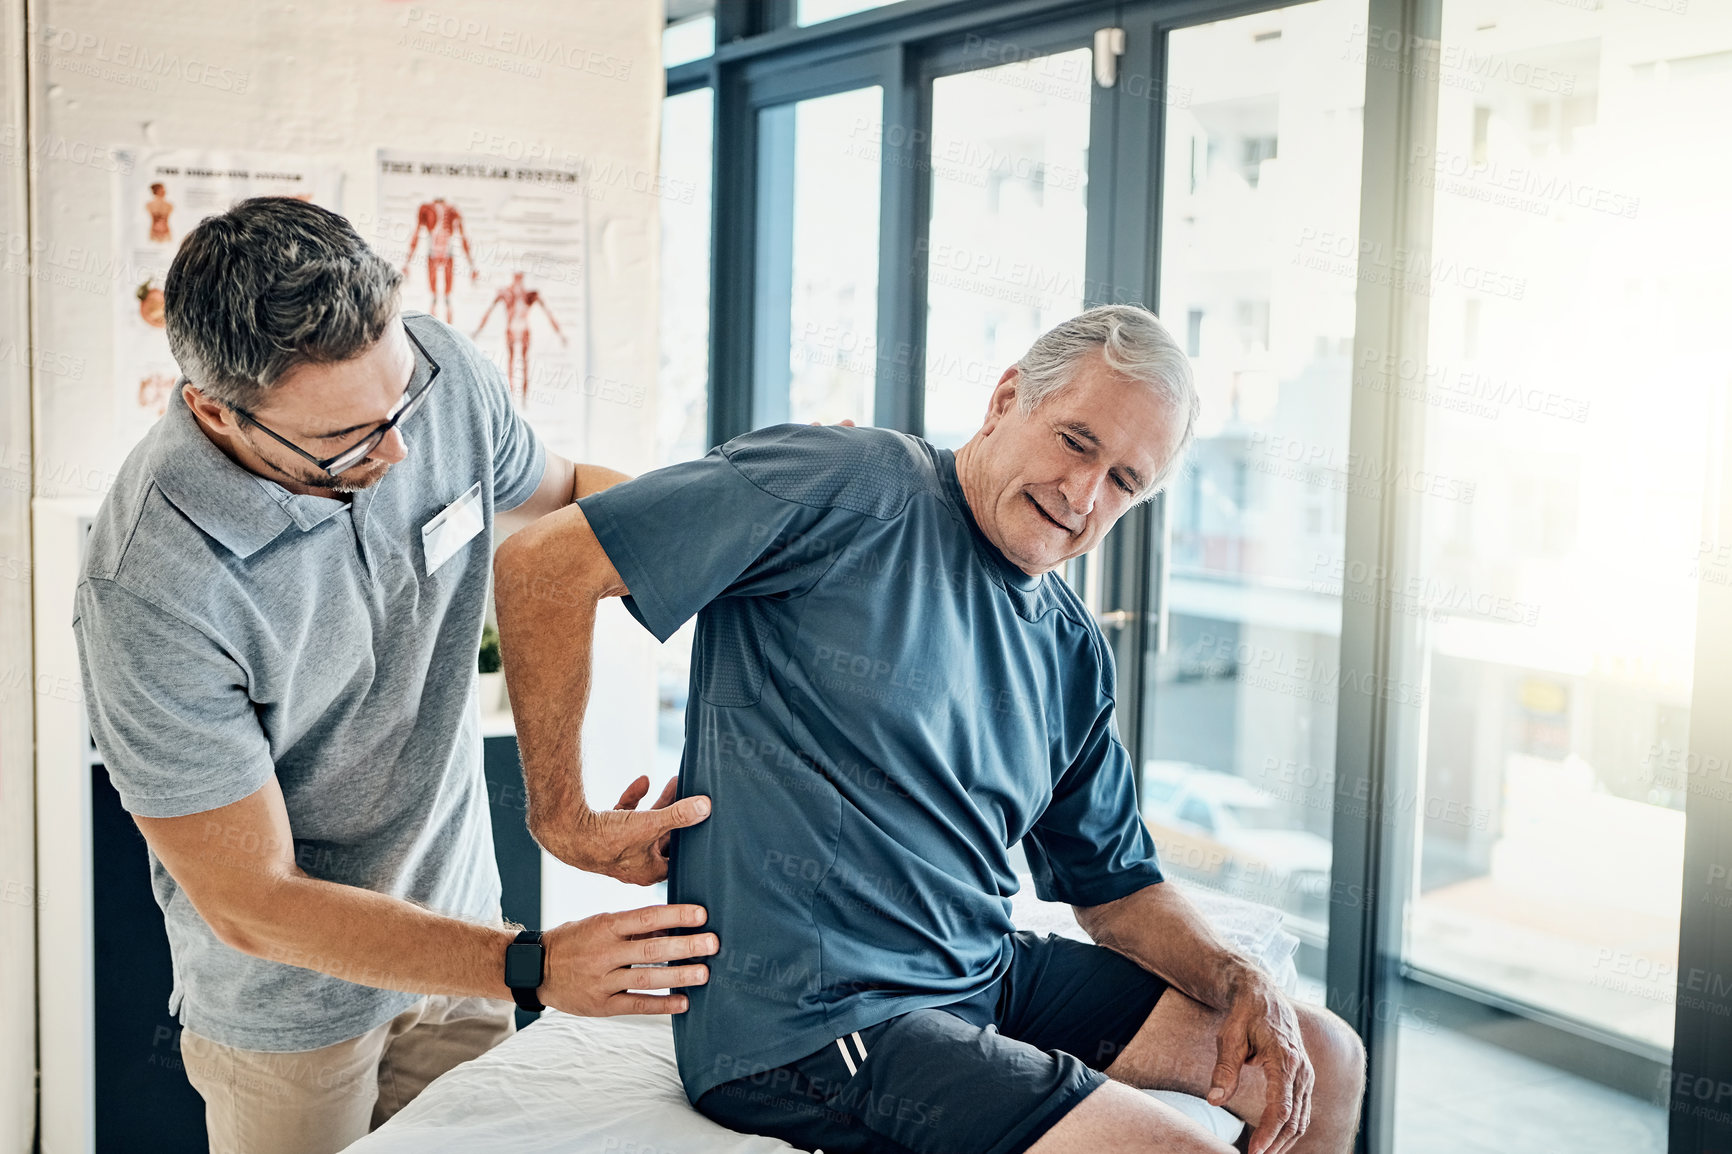 Buy stock photo Shot of a skilled physiotherapist addressing his mature patient's back pain in the rehabilitation center